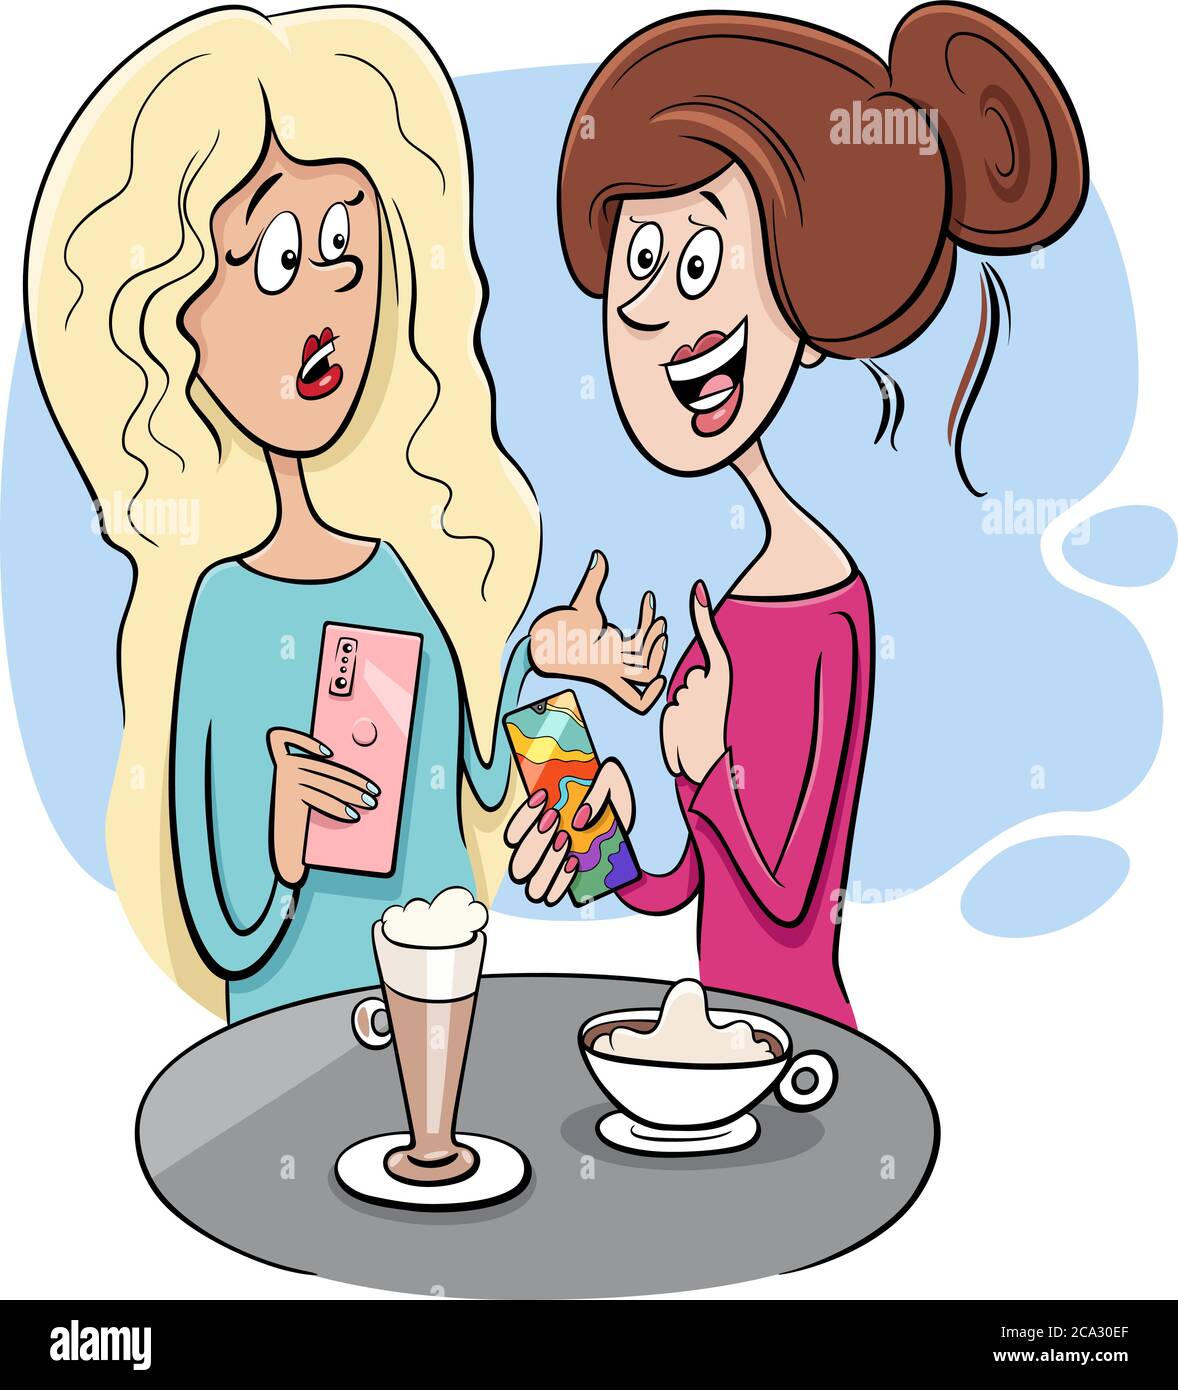 Cartoon Illustration Of Two Gossiping Women In A Cafe Stock Vector Image Art Alamy